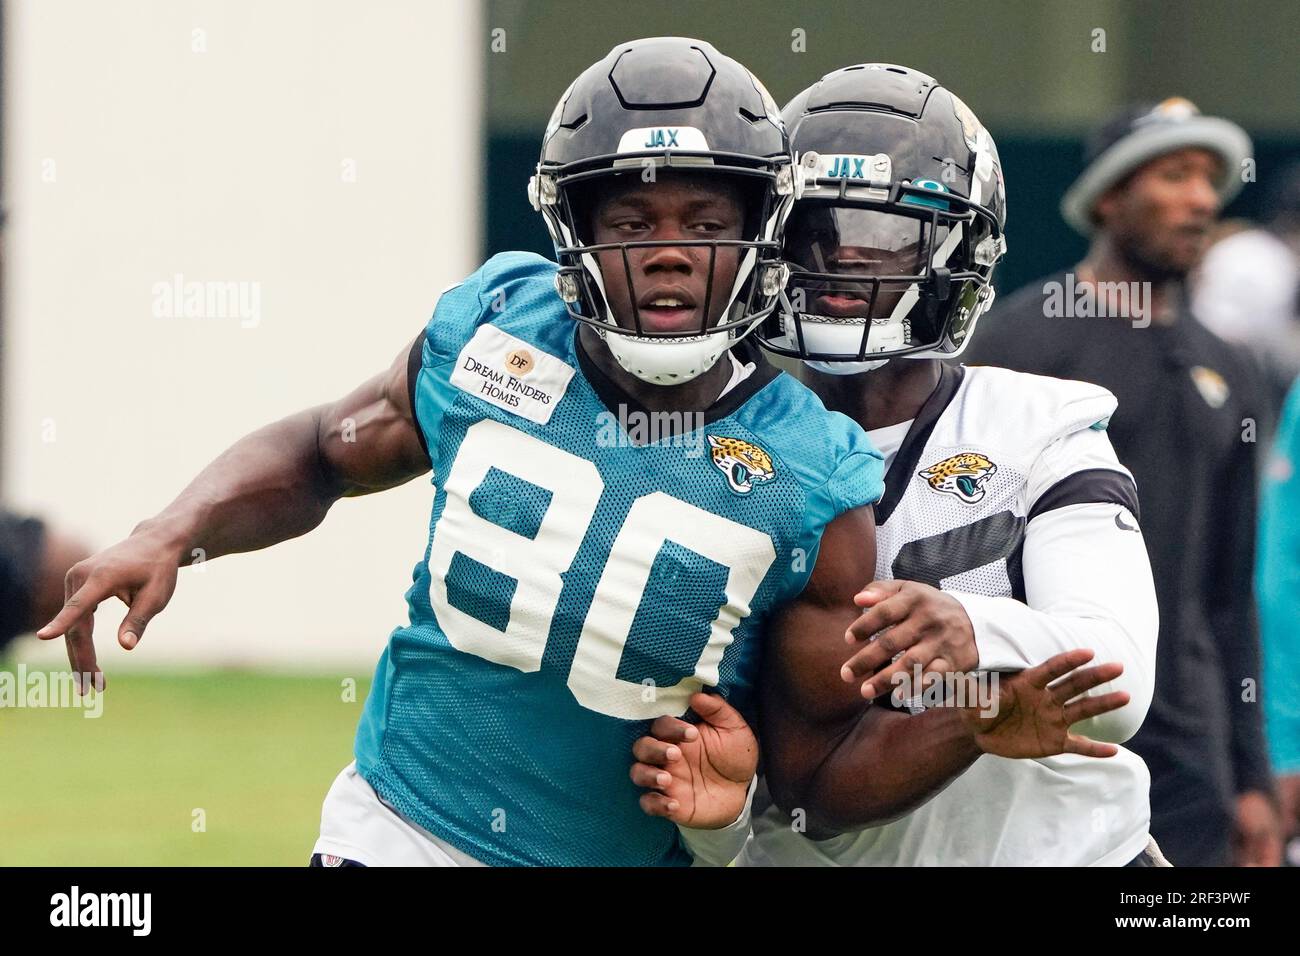 The 33rd Team thinks Jaguars' Kevin Austin will make the team